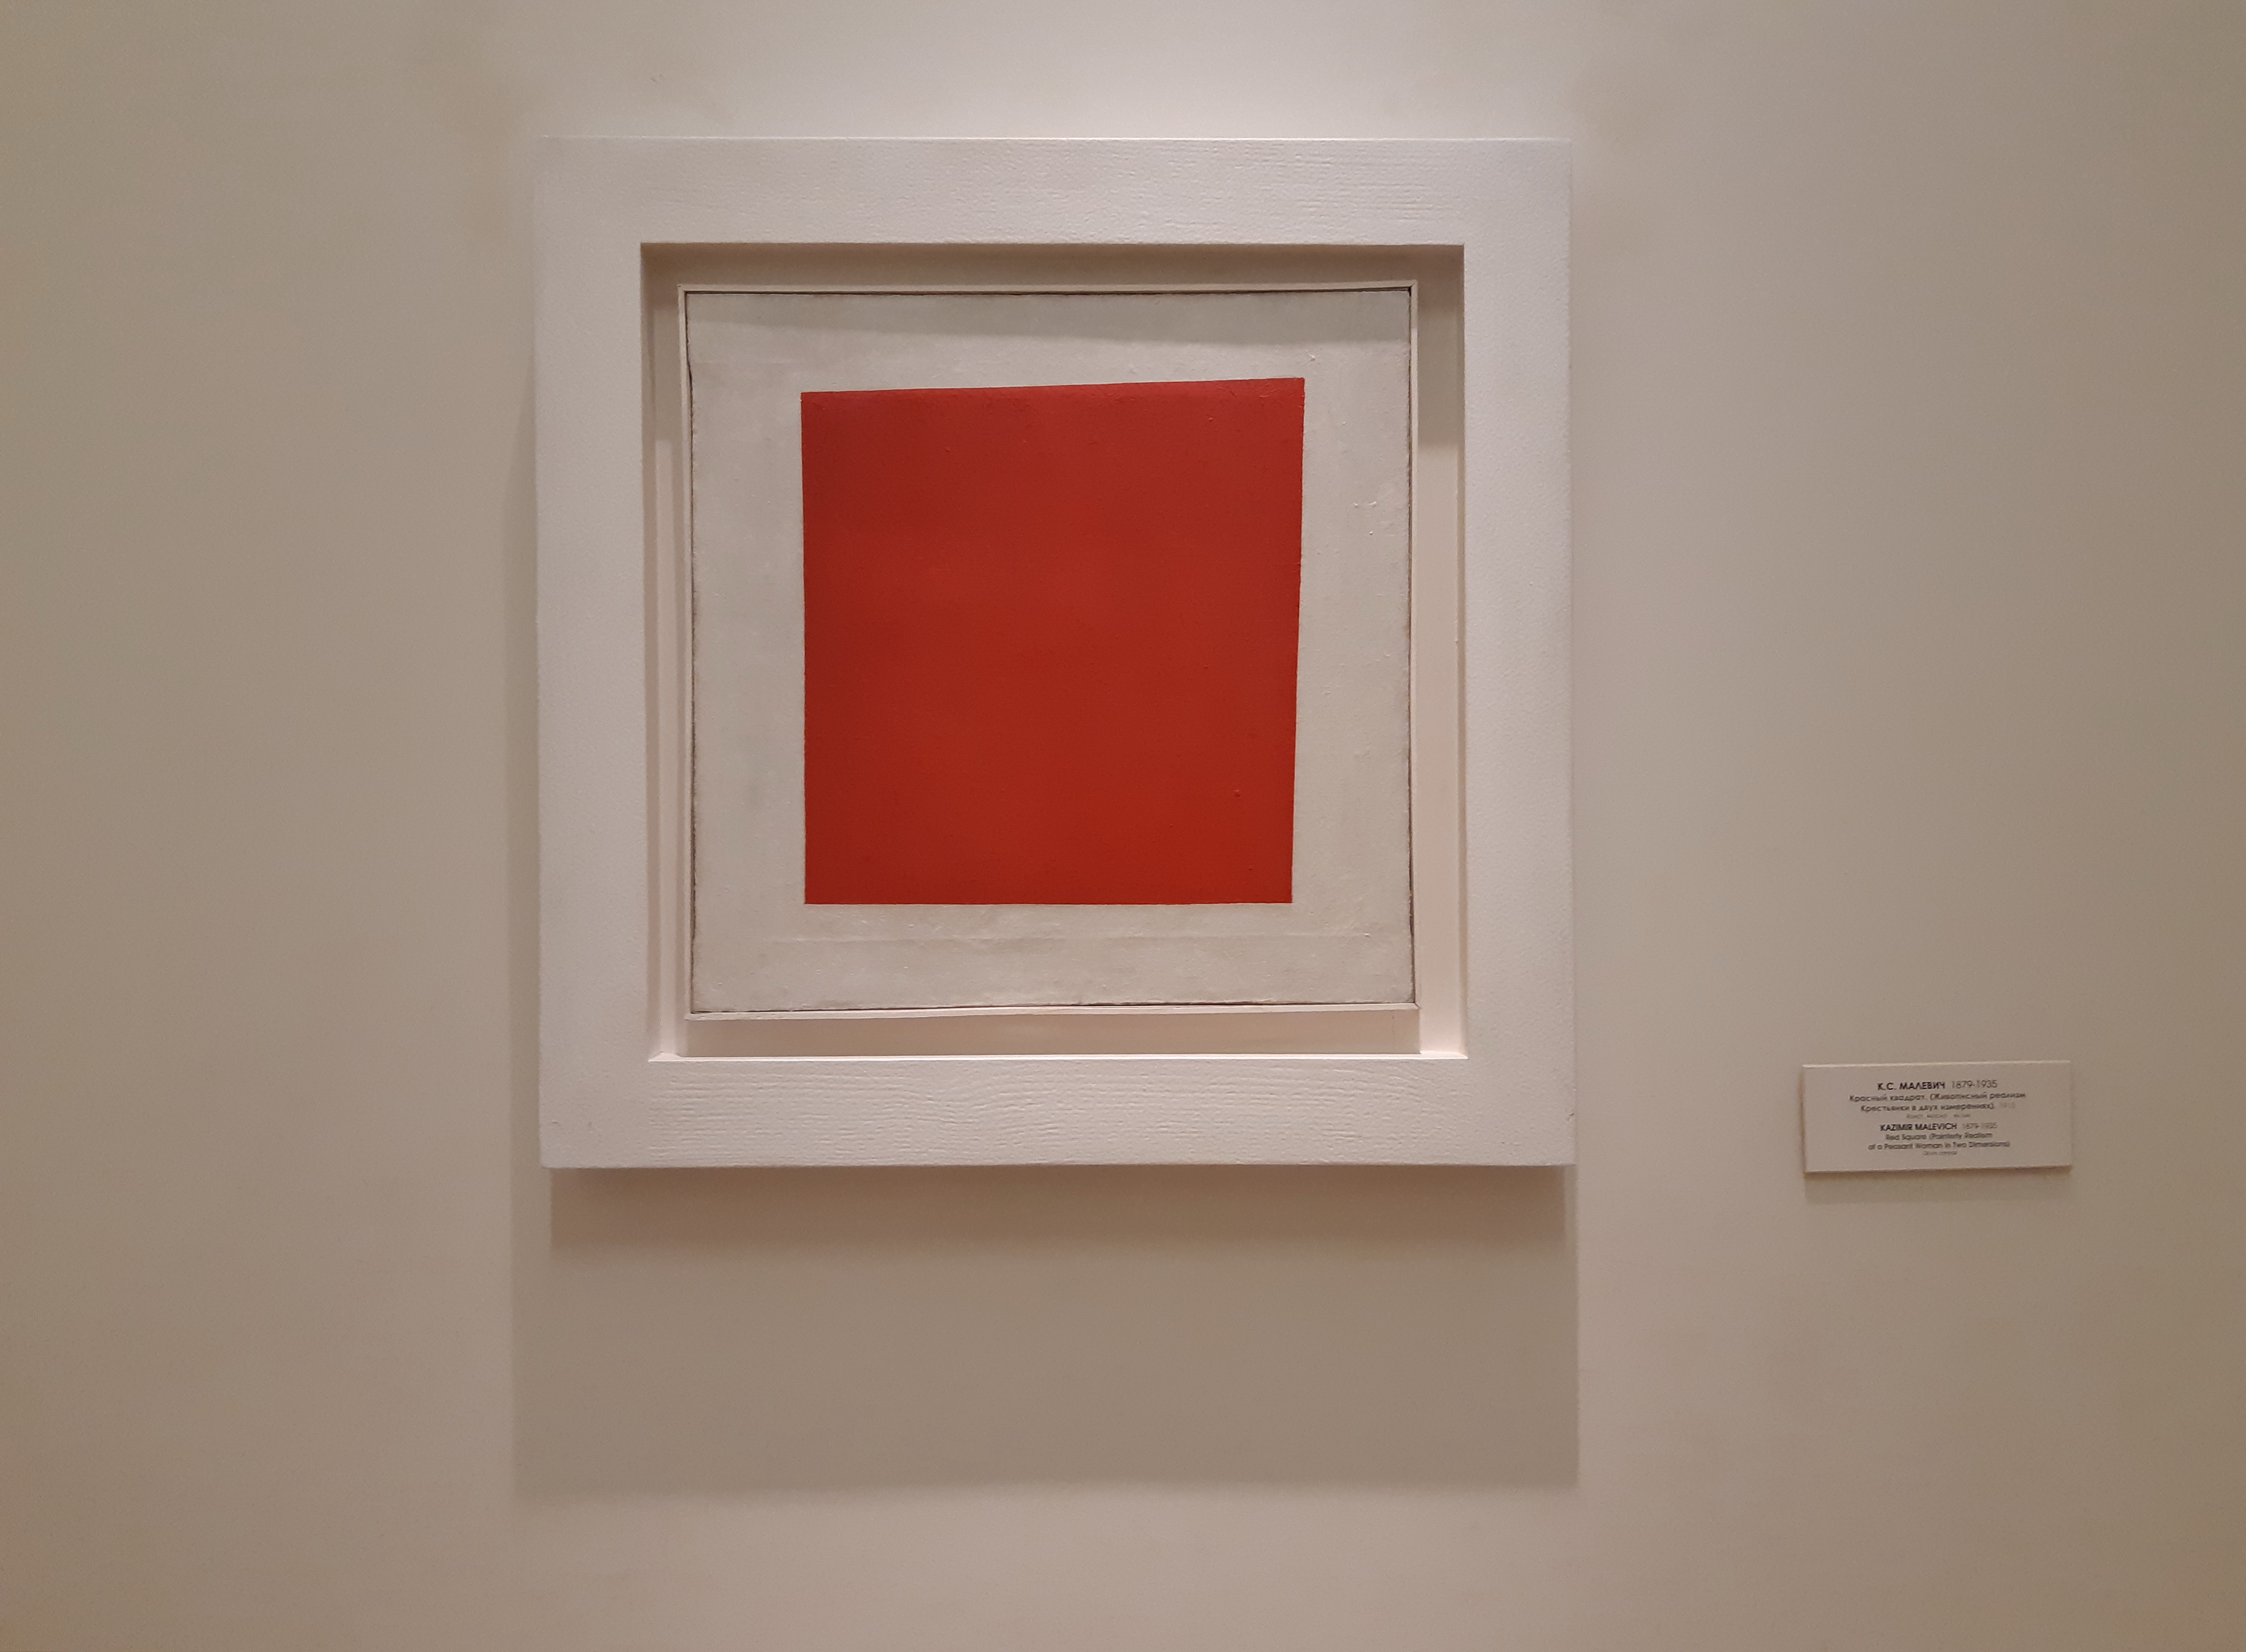 File:Red square by Malevich (GRM) FRAME.jpg - Wikimedia Commons